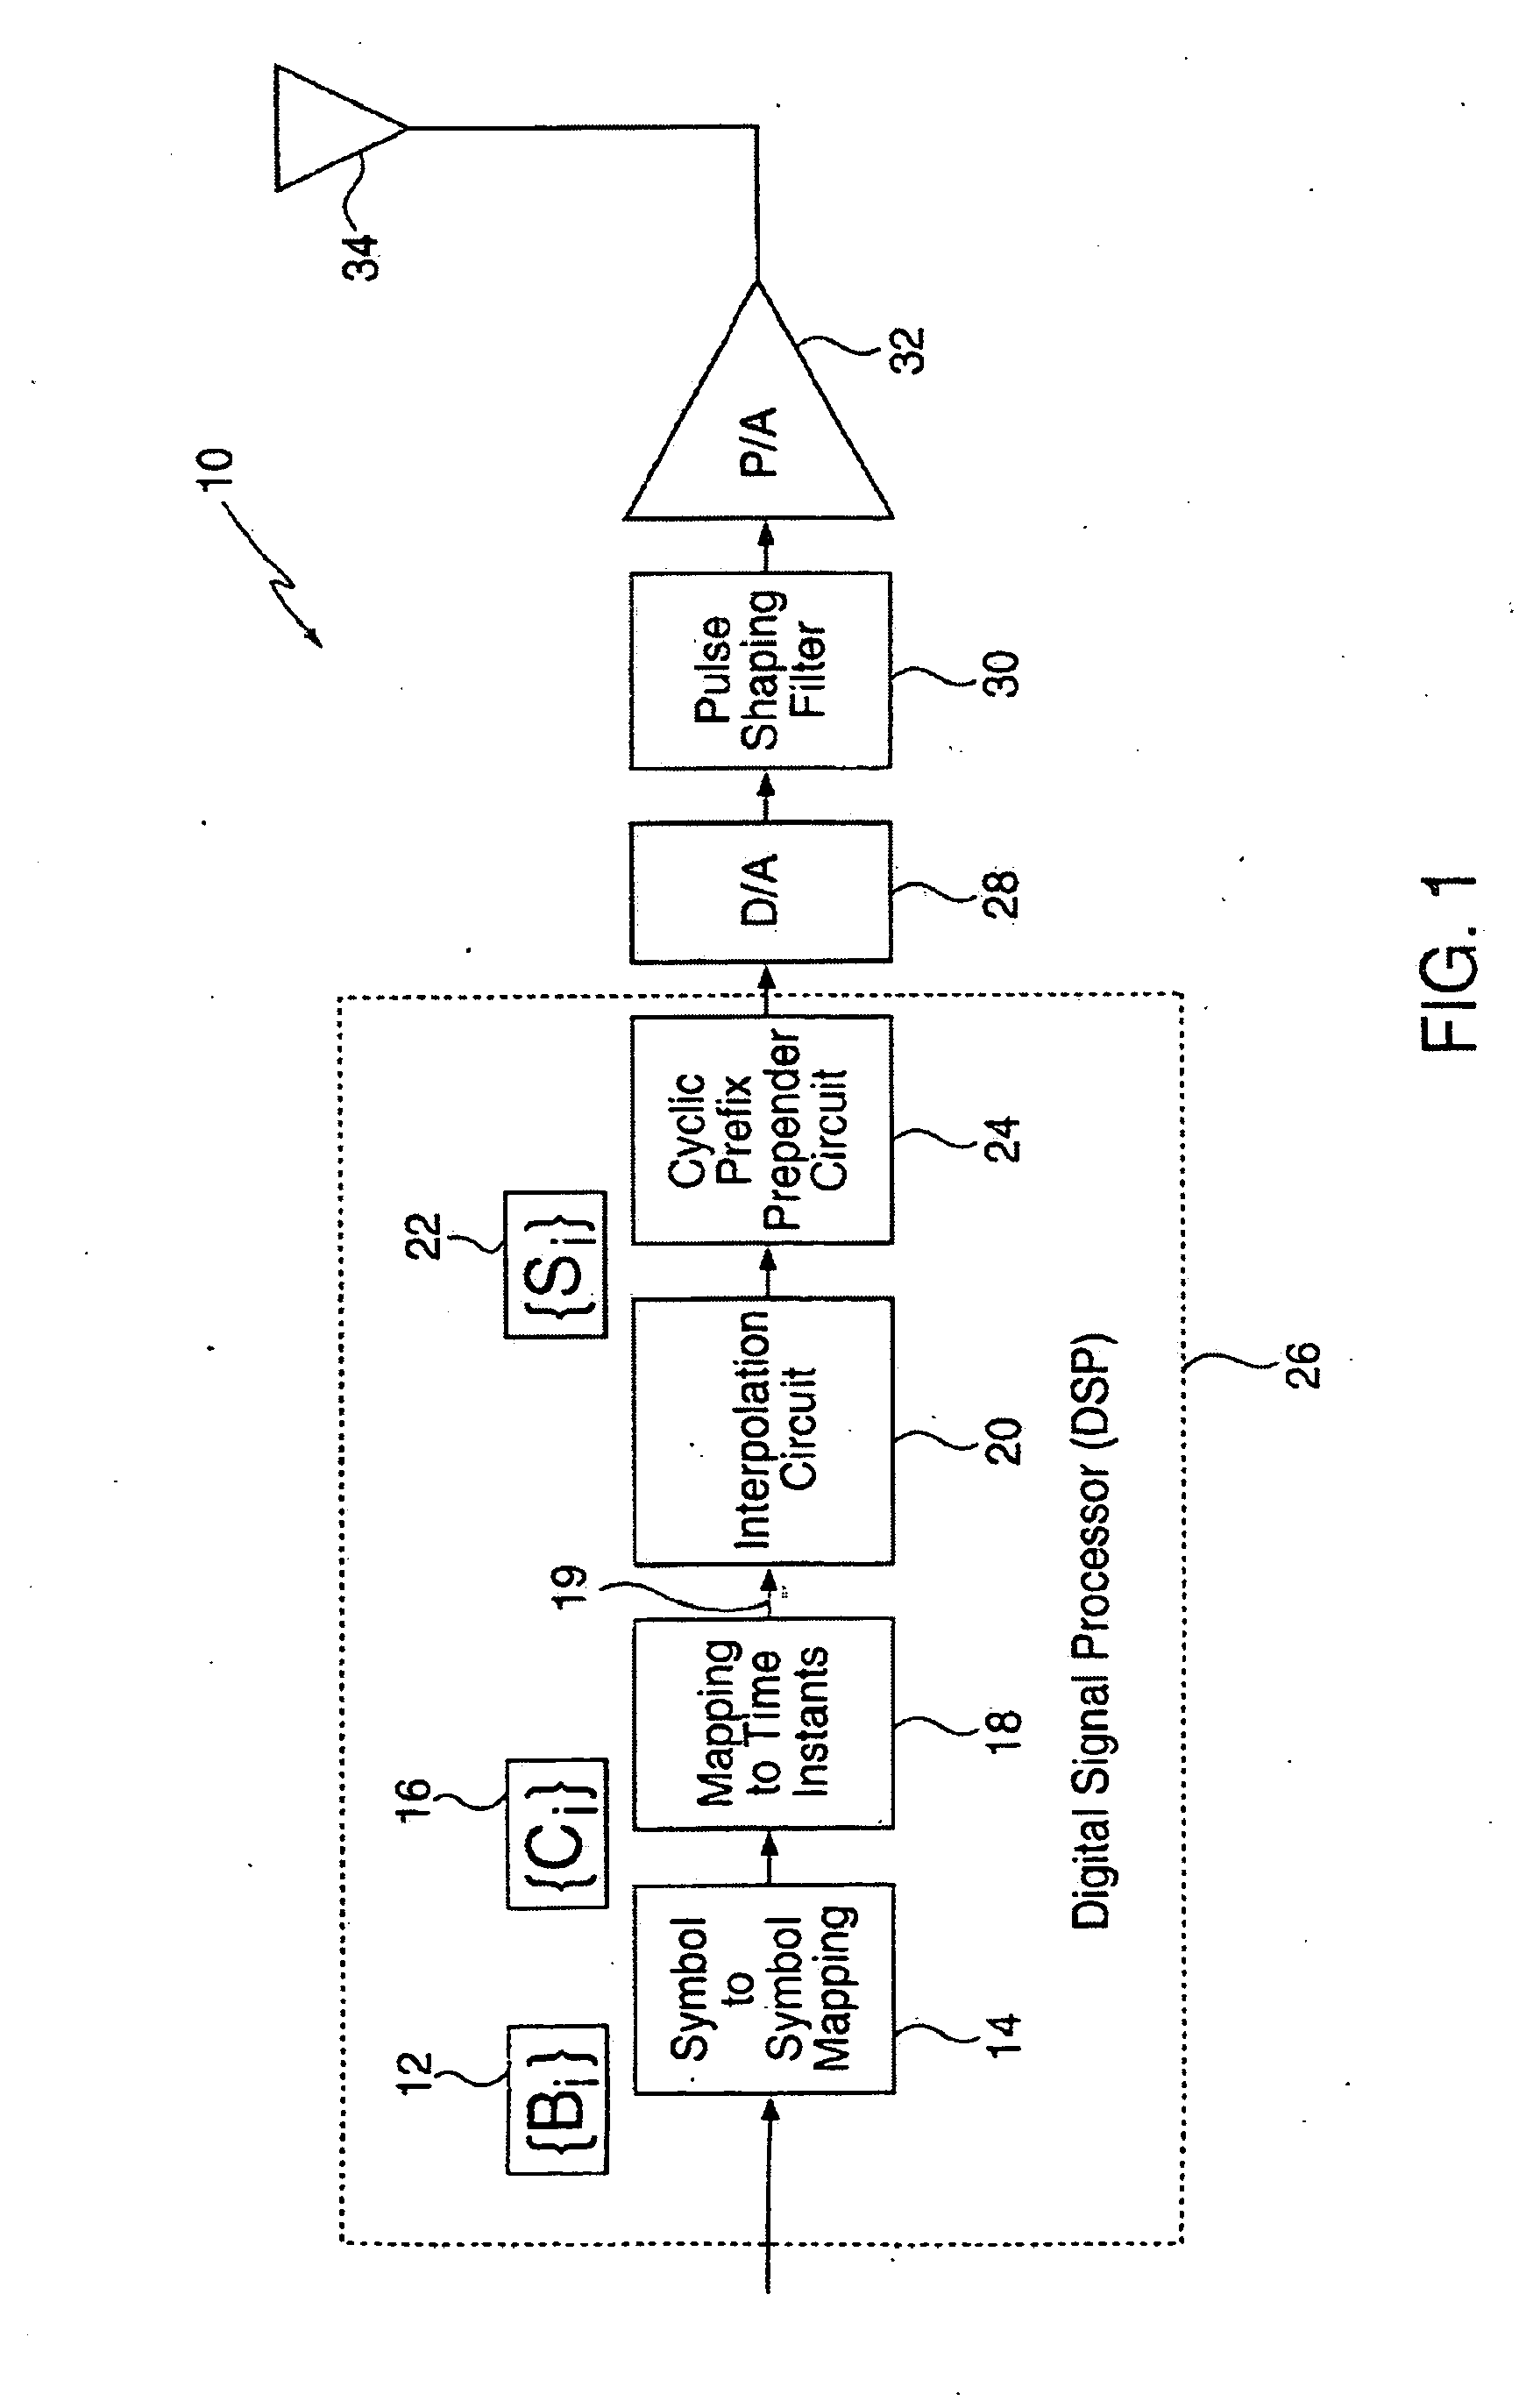 Signaling method in an OFDM multiple access system